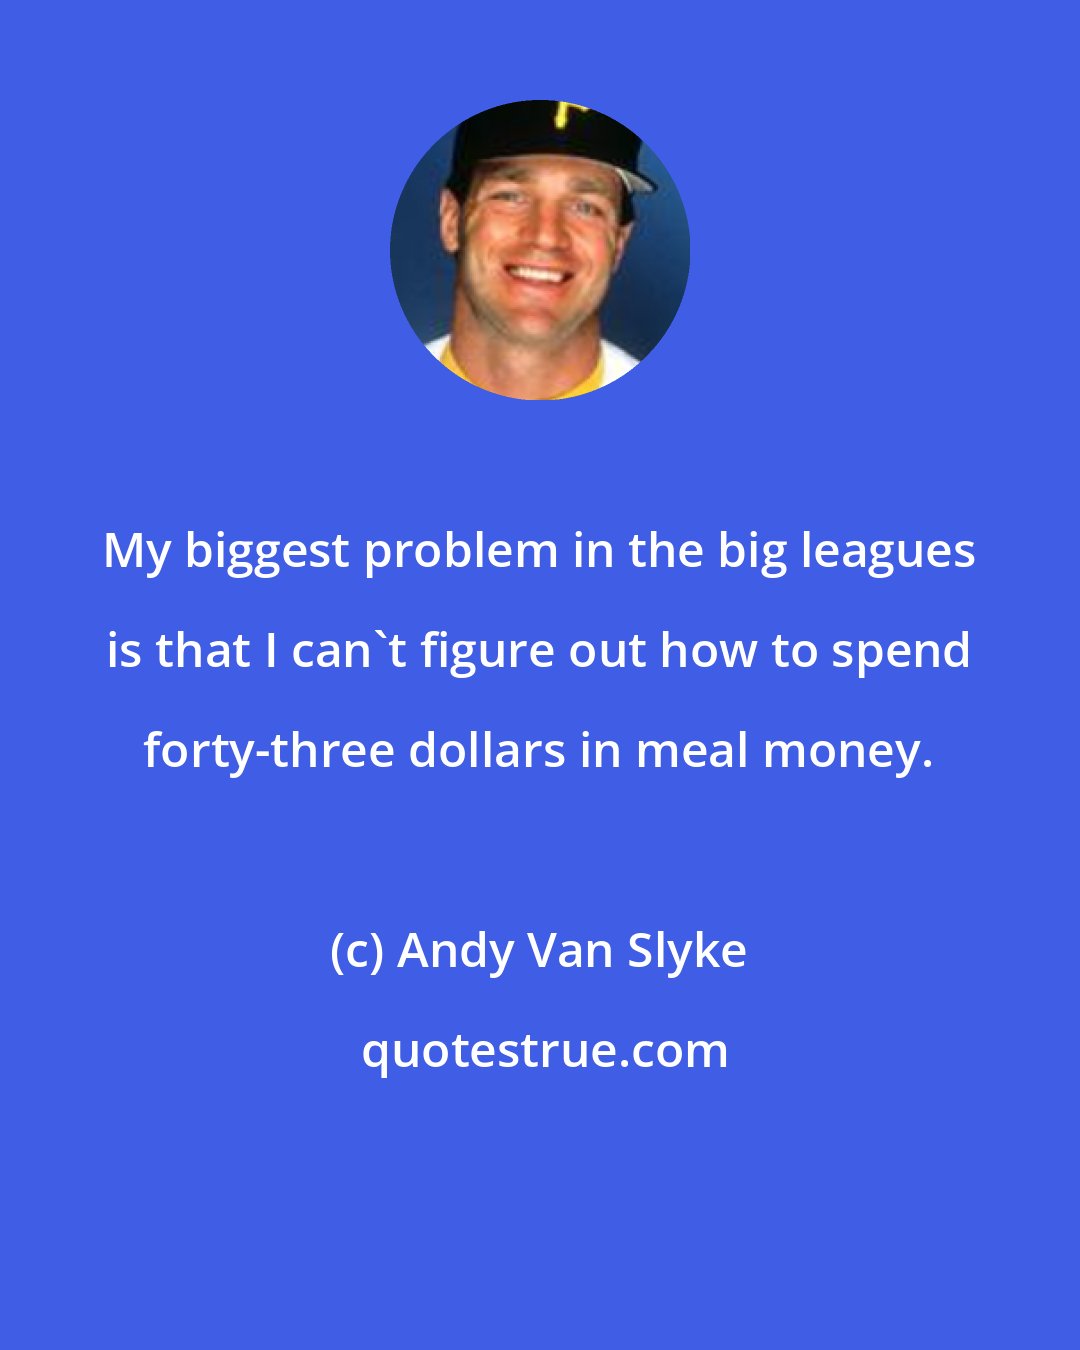 Andy Van Slyke: My biggest problem in the big leagues is that I can't figure out how to spend forty-three dollars in meal money.